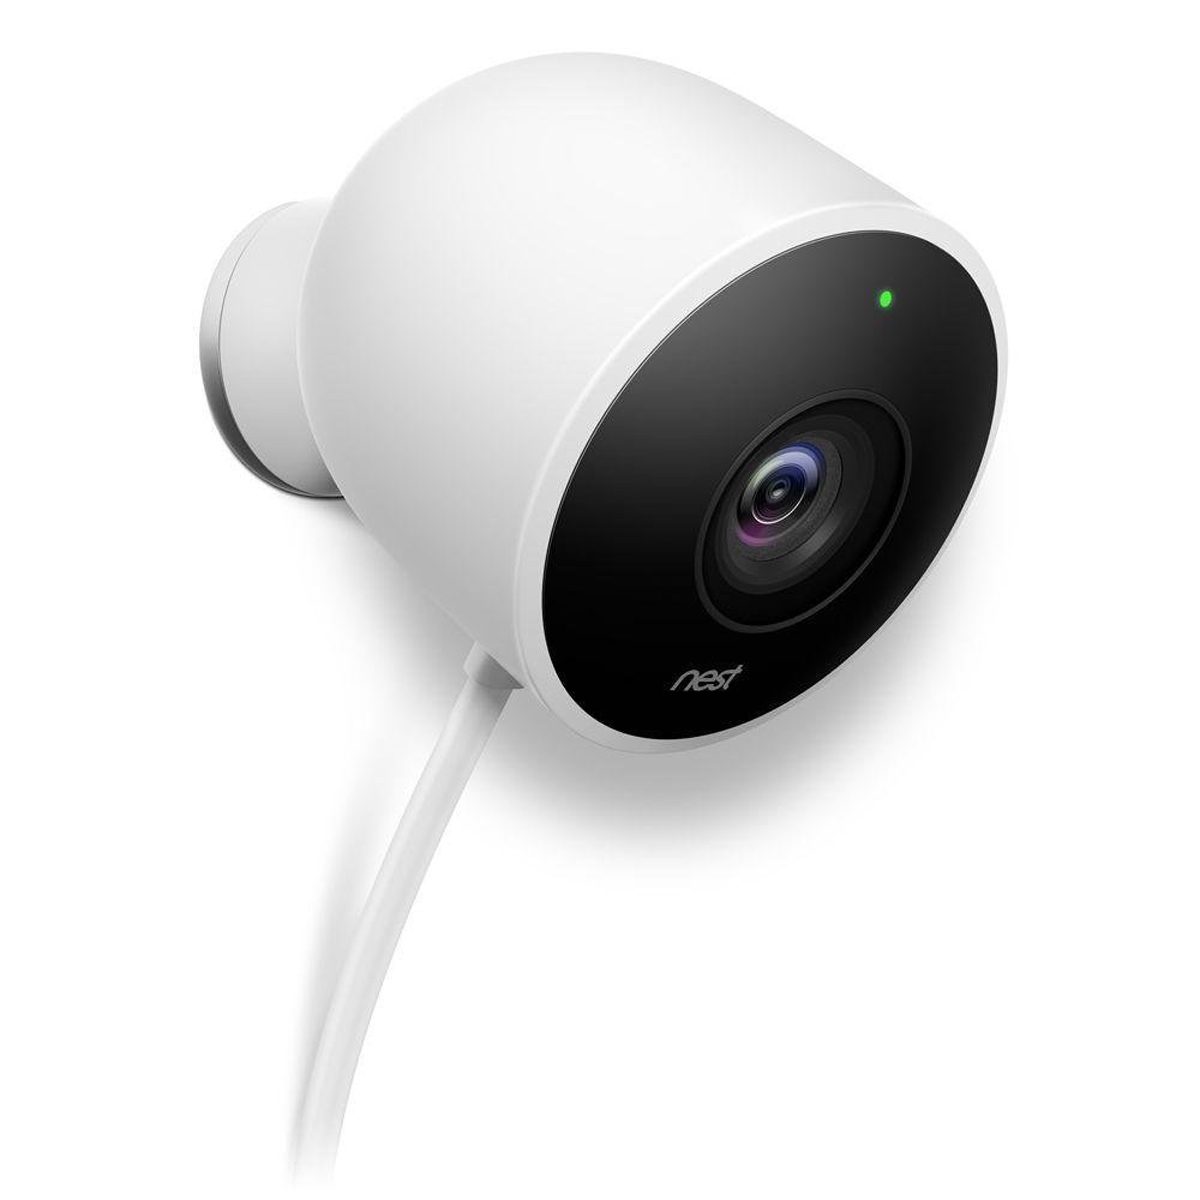 <p>Home security cameras have come a long way. The <a href="https://www.lowes.com/pd/Google-Nest-Cam-Battery-Powered-Wireless-Indoor-and-Outdoor-Smart-Home-Security-Camera/5003051859" rel="noopener noreferrer">Google Nest Cam</a> is one of the best on the market. Set it up and connect to your WiFi, and you can check in on your house from anywhere in the world.</p> <p>The camera can be configured to be motion activated, and you'll receive alerts when it's triggered. The 4K camera with 12x zoom can automatically detect and zoom in on intruders and follow their movements, giving you peace of mind while you're away.</p> <p class="listicle-page__cta-button-shop"><a class="shop-btn" href="https://www.lowes.com/pd/Google-Nest-Cam-Battery-Powered-Wireless-Indoor-and-Outdoor-Smart-Home-Security-Camera/5003051859">Shop Now</a></p>